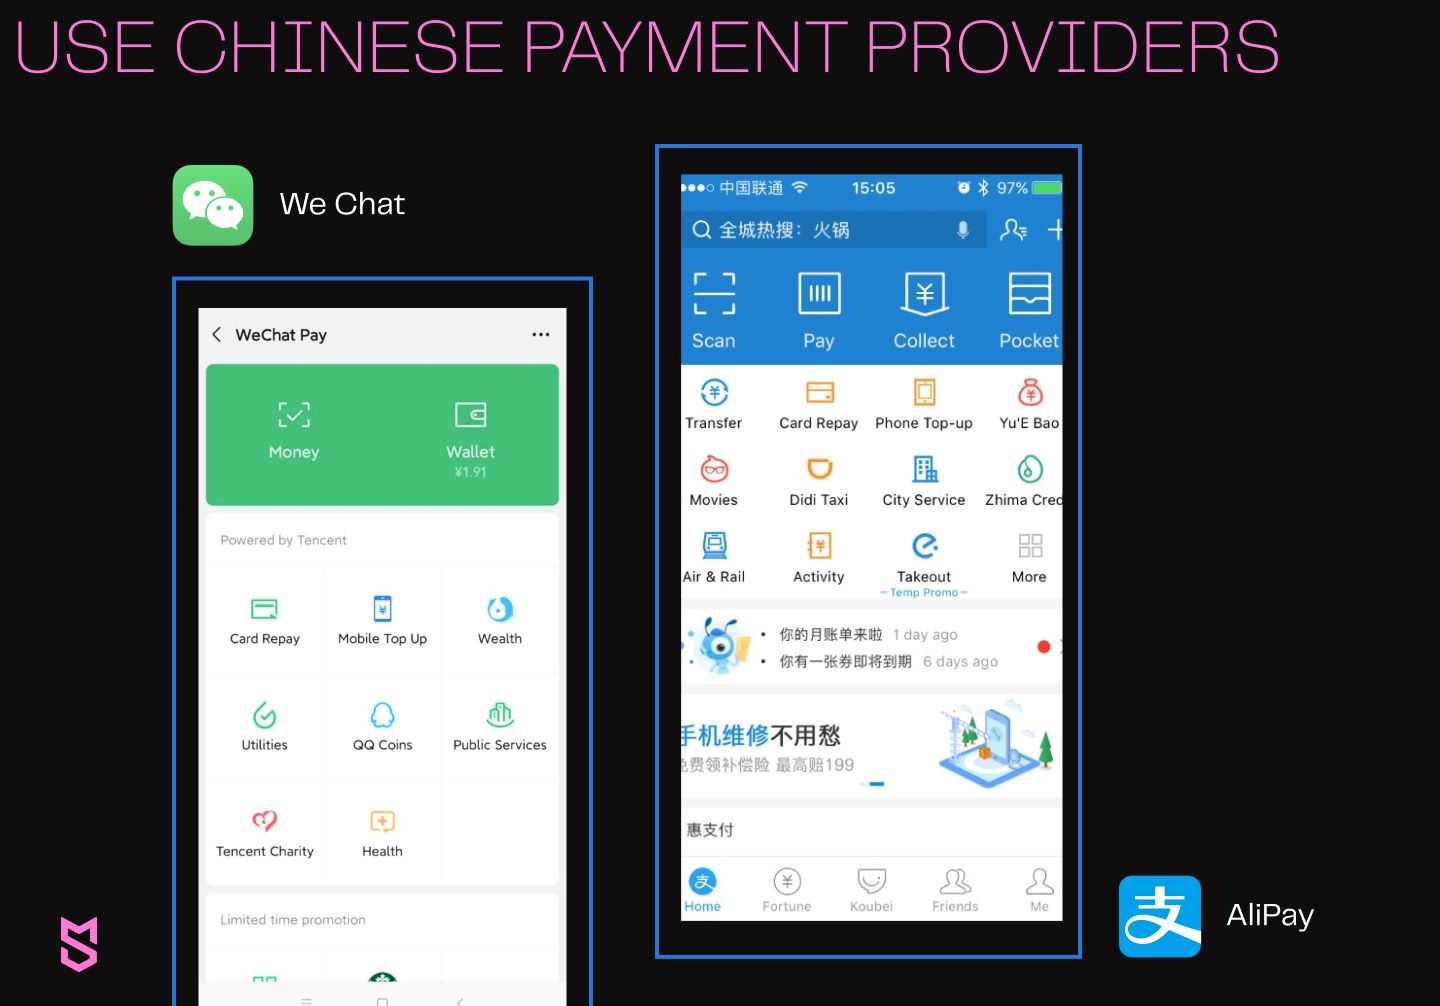 Use Chinese payment providers